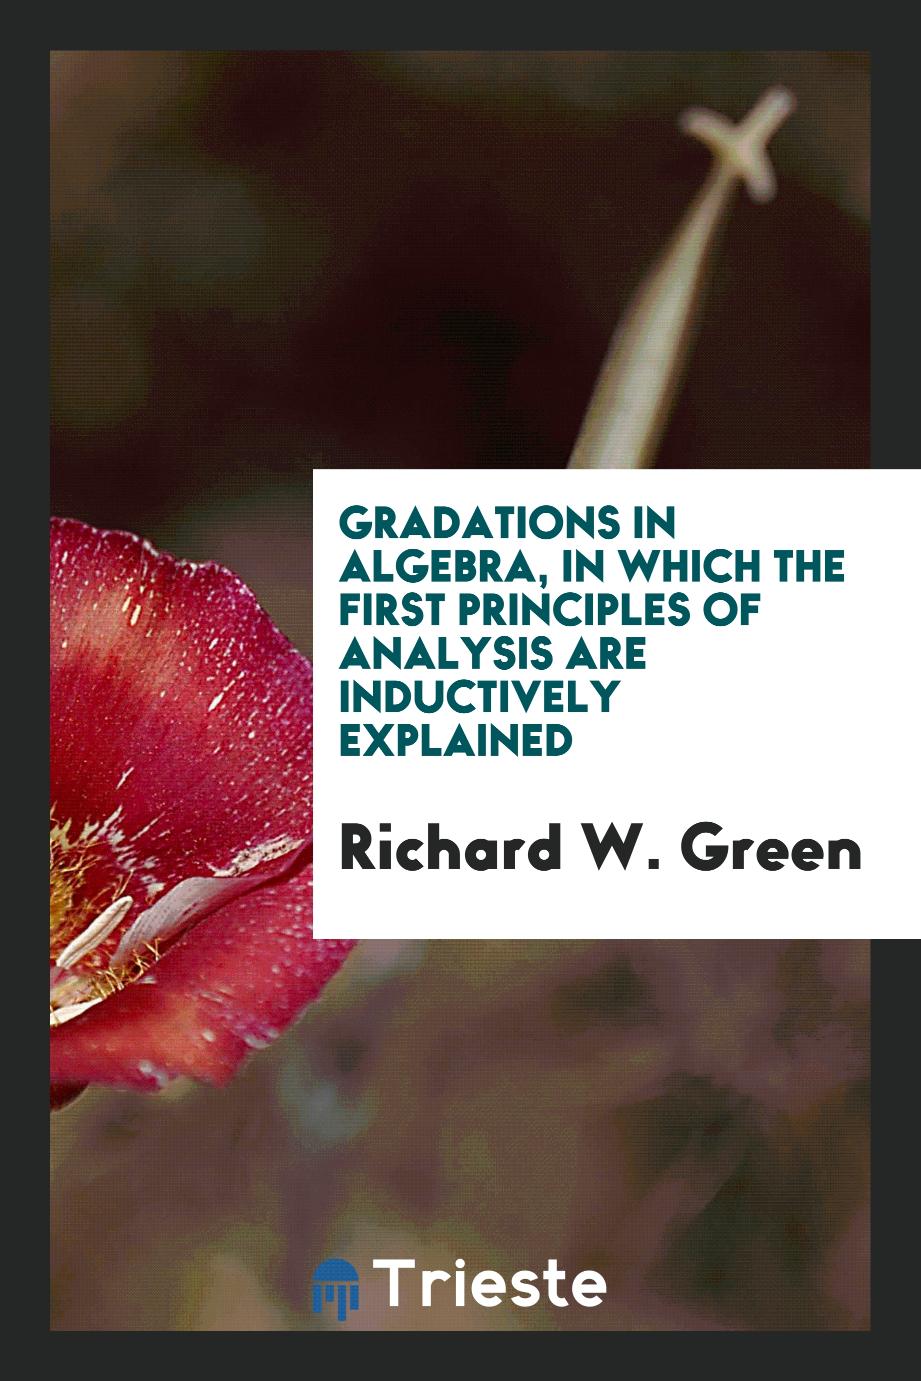 Gradations in algebra, in which the first principles of analysis are inductively explained